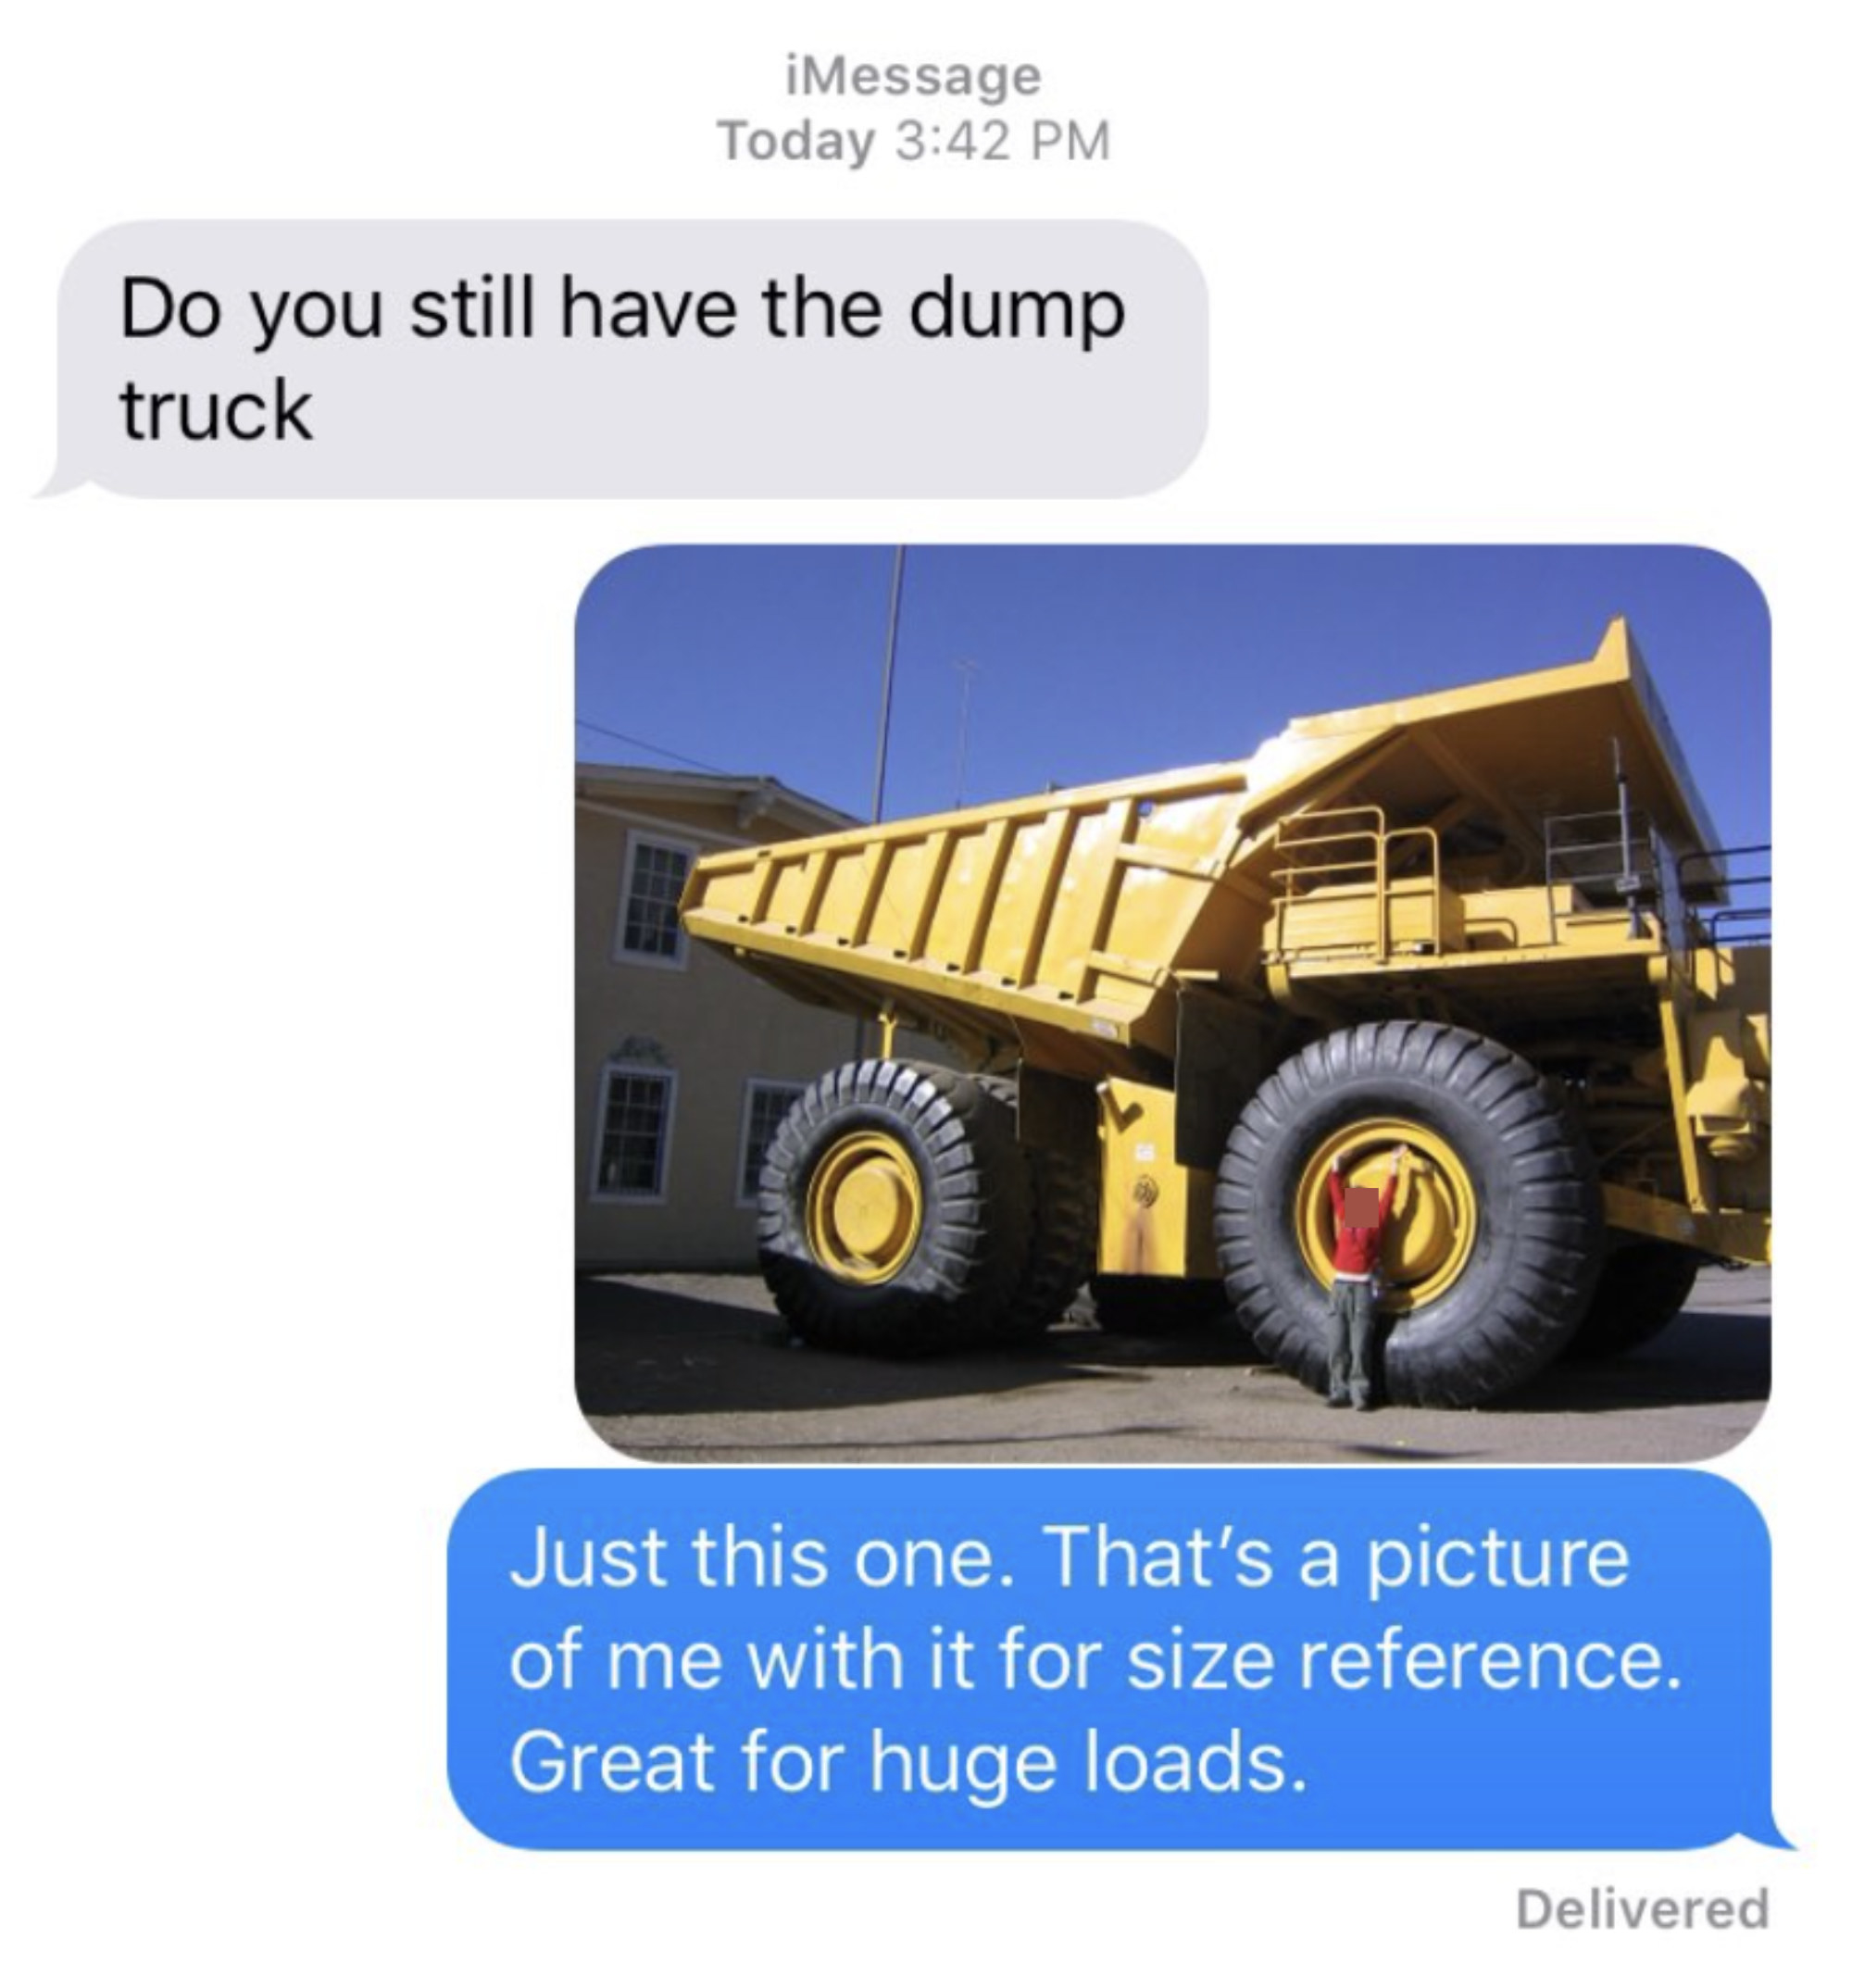 Person asks if they still have the dump truck, and person responds with a picture of a huge dump truck and &quot;just this one&quot;